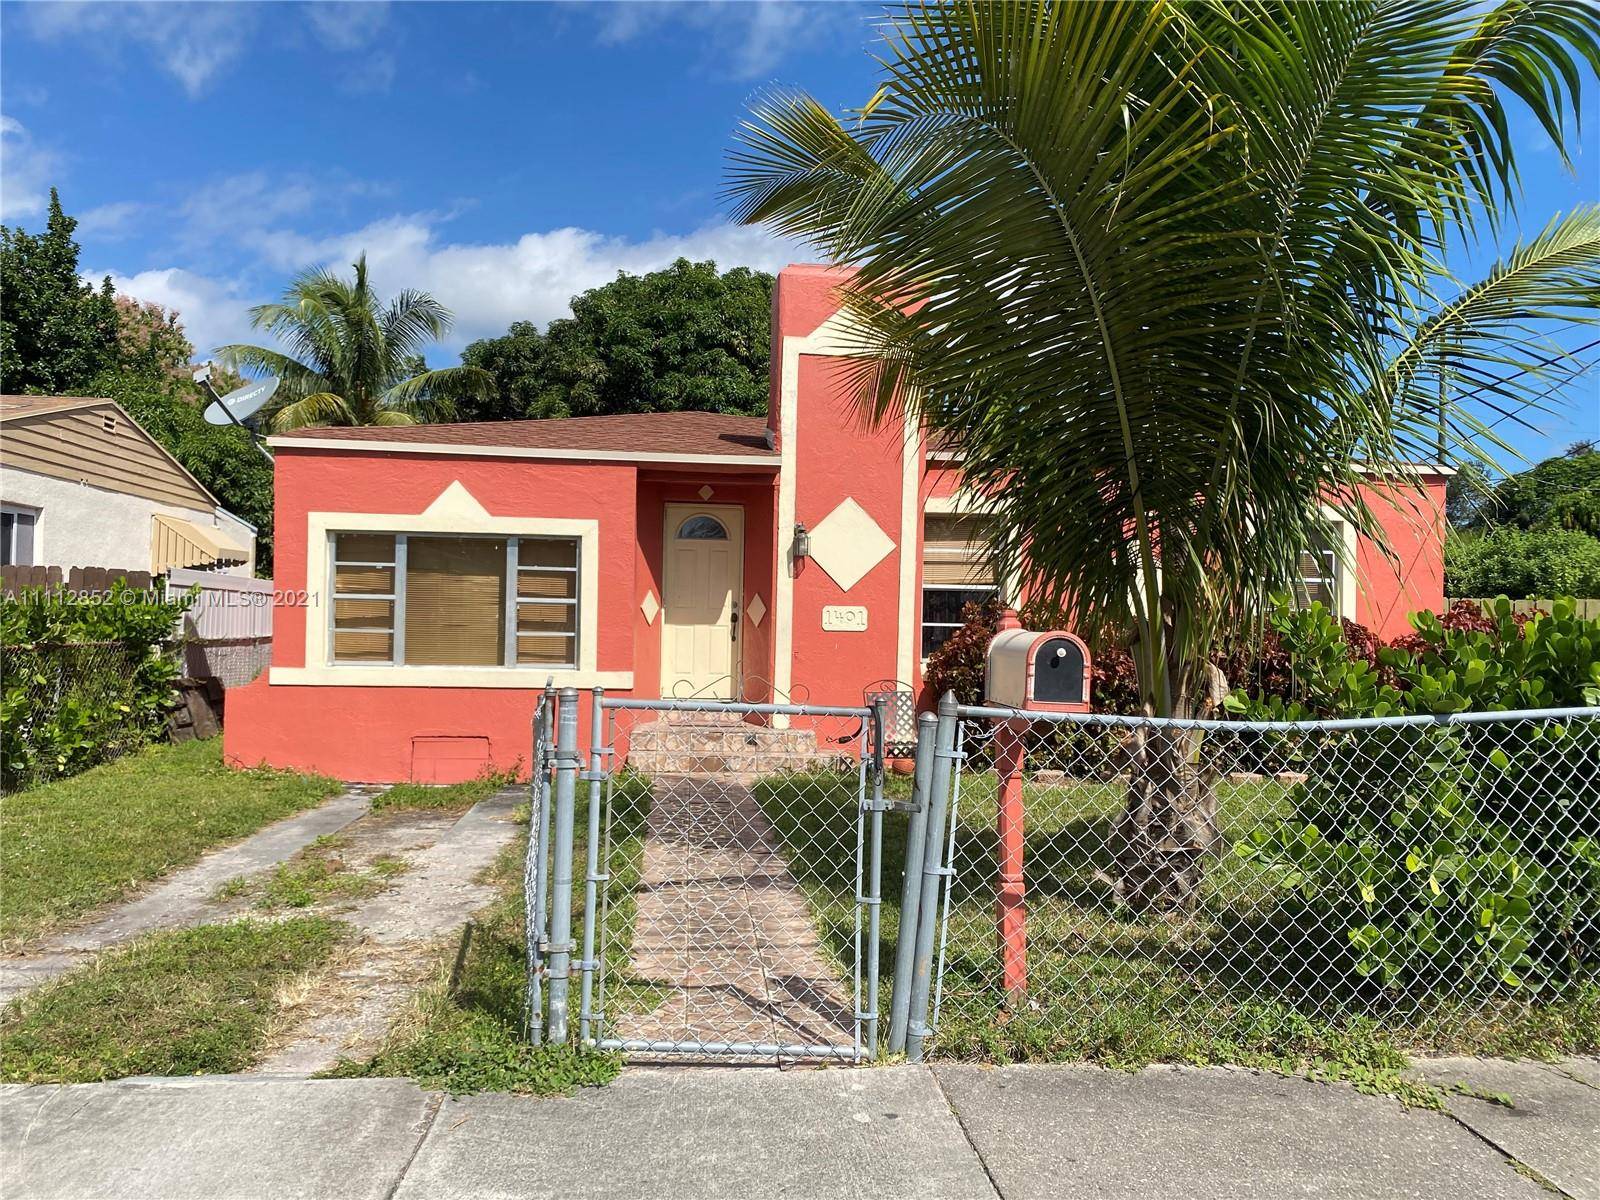 Spacious 3 bedroom 1 bedroom home on a large corner lot, property features newer roof updated bathroom, tile floors large back yard with mature fruit trees.